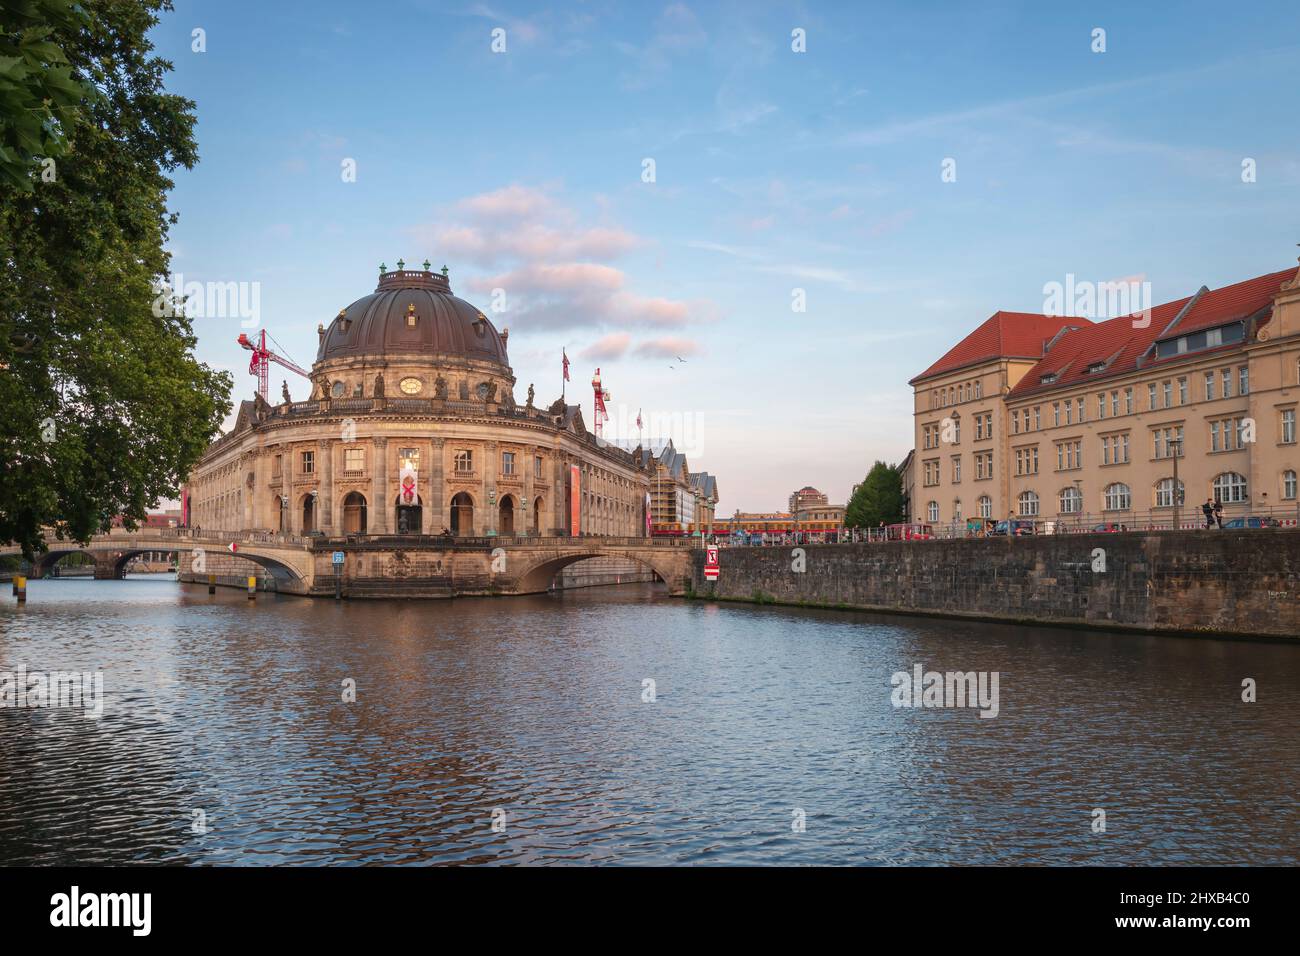 Berlin, Germany - July 14, 2019: The Bode Museum located on Museum Island Berlin Mitte at sunset Stock Photo